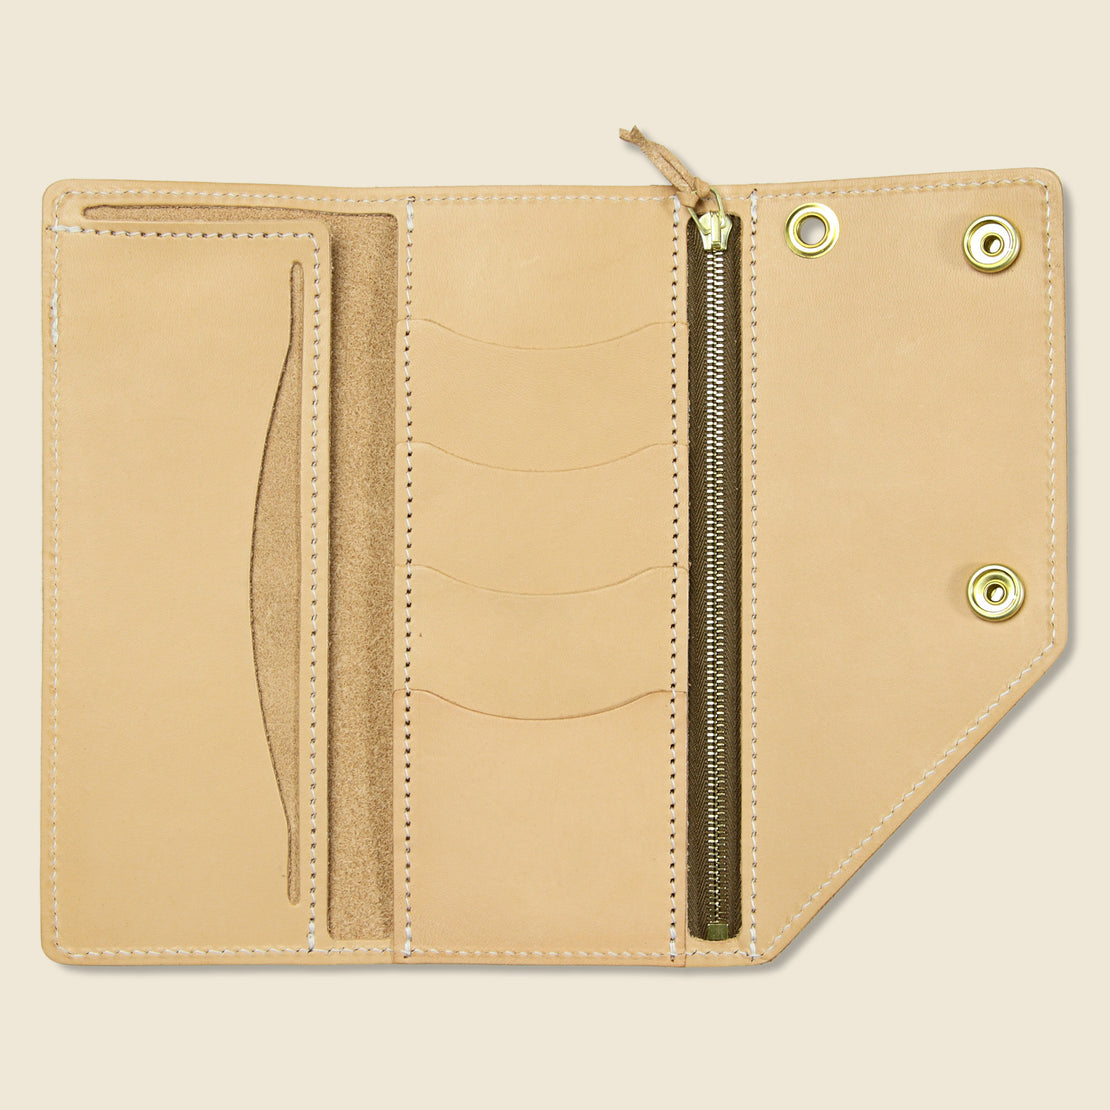 Workman Wallet - Natural - Tanner - STAG Provisions - Accessories - Wallets